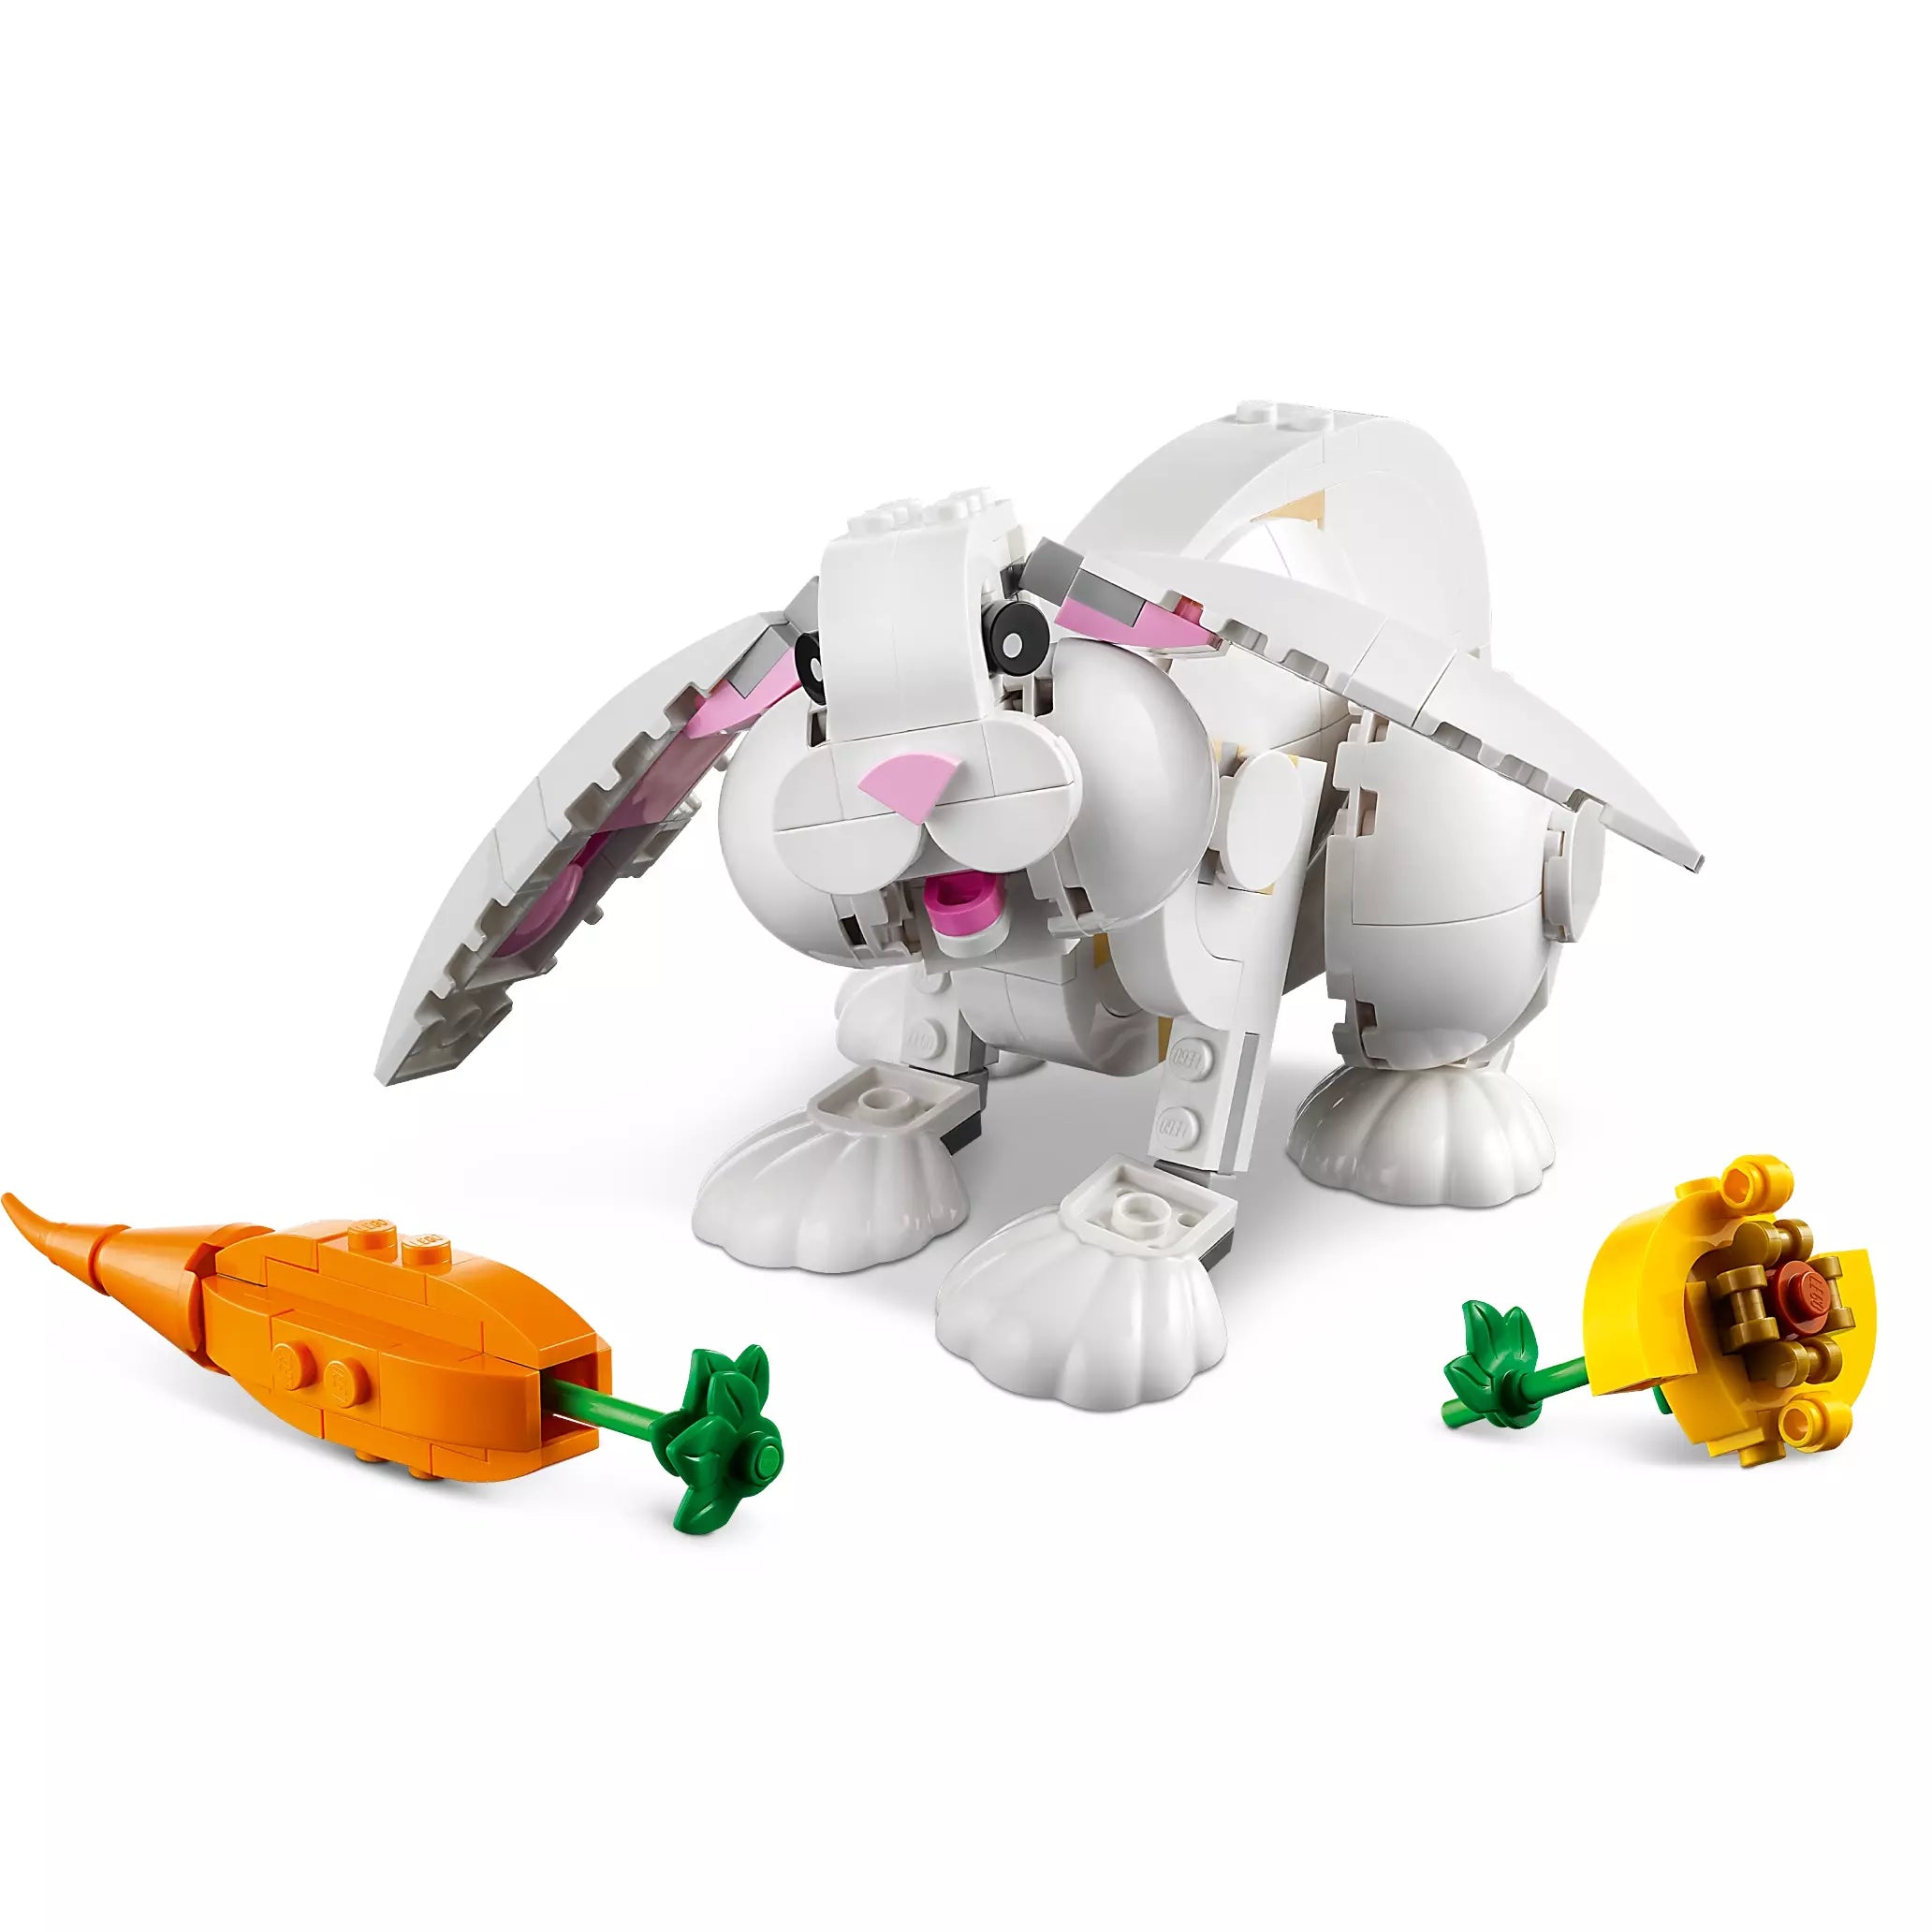 LEGO 31058 Creator Mighty Dinosaurs Build It Yourself Dinosaur Set، Create a Pterodactyl، Triceratops and T Rex Toy (174 قطعة)